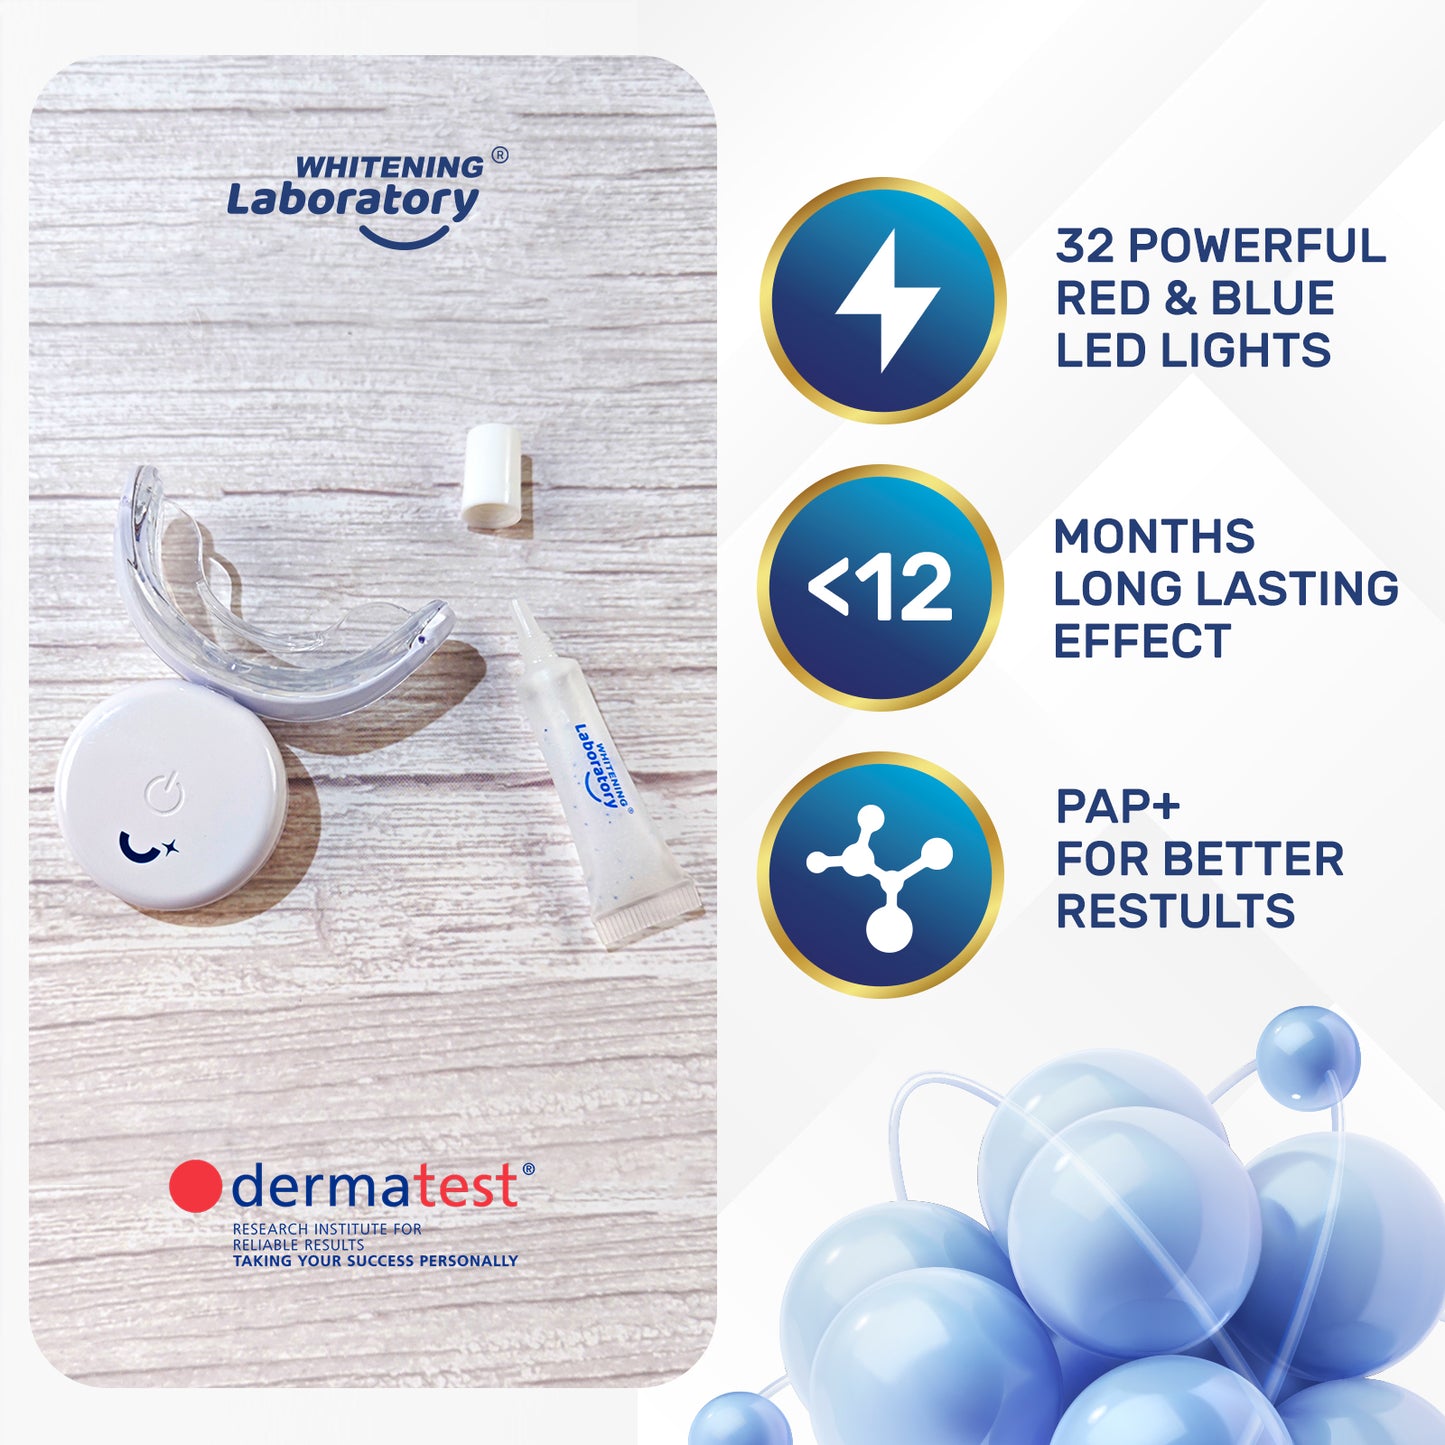 Whitening Laboratory LED teeth whitening device with 32 red and blue lights, alongside whitening gel, highlighting long-lasting effects and PAP+ formula for better results.